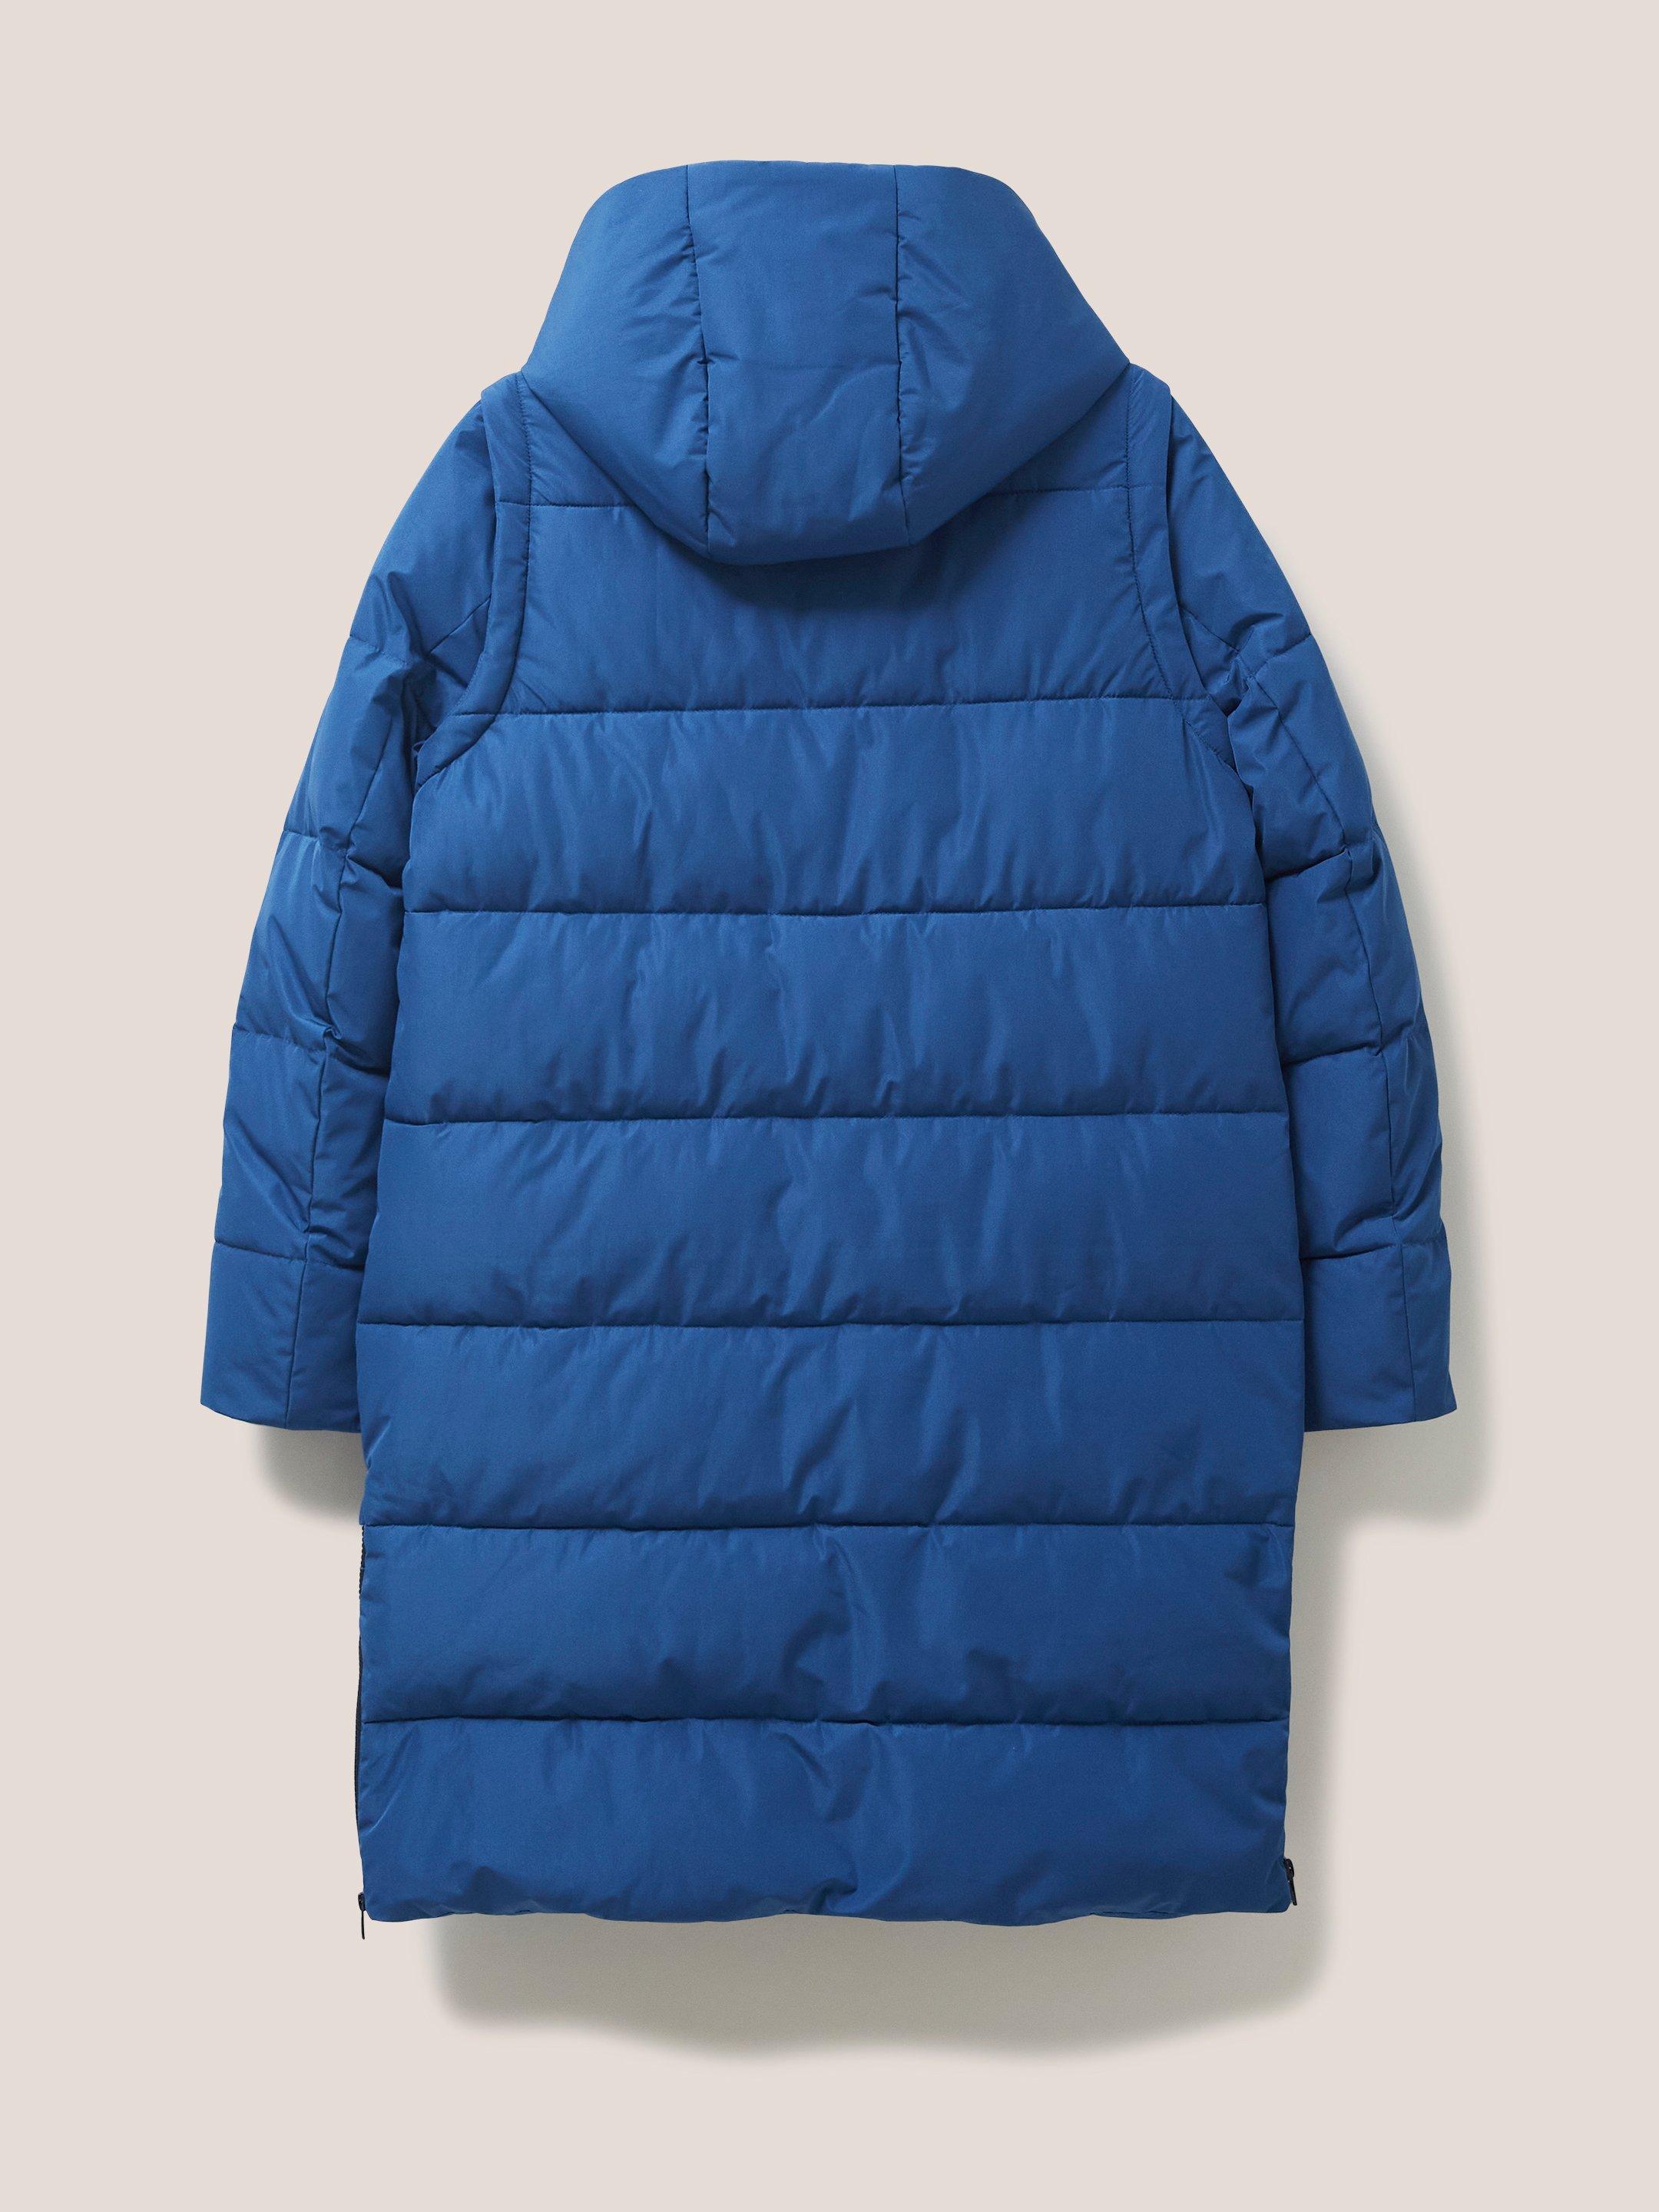 Dania Multiway Quilted Coat in BLUE MLT - FLAT BACK